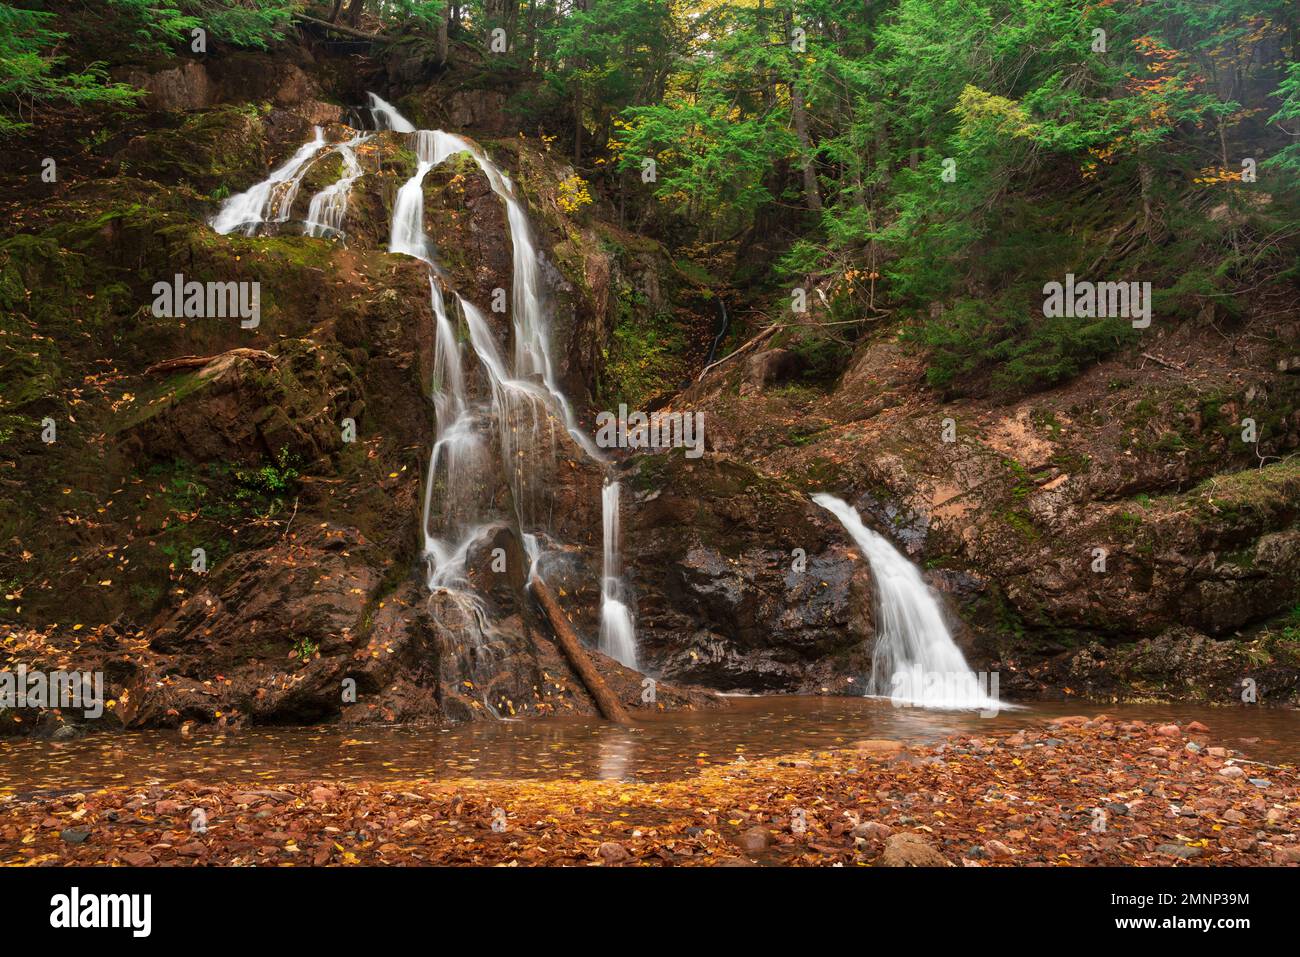 Wentworth Falls with fall foliage color in the Wentworth Valley,  Nova Scotia, Canada. Stock Photo